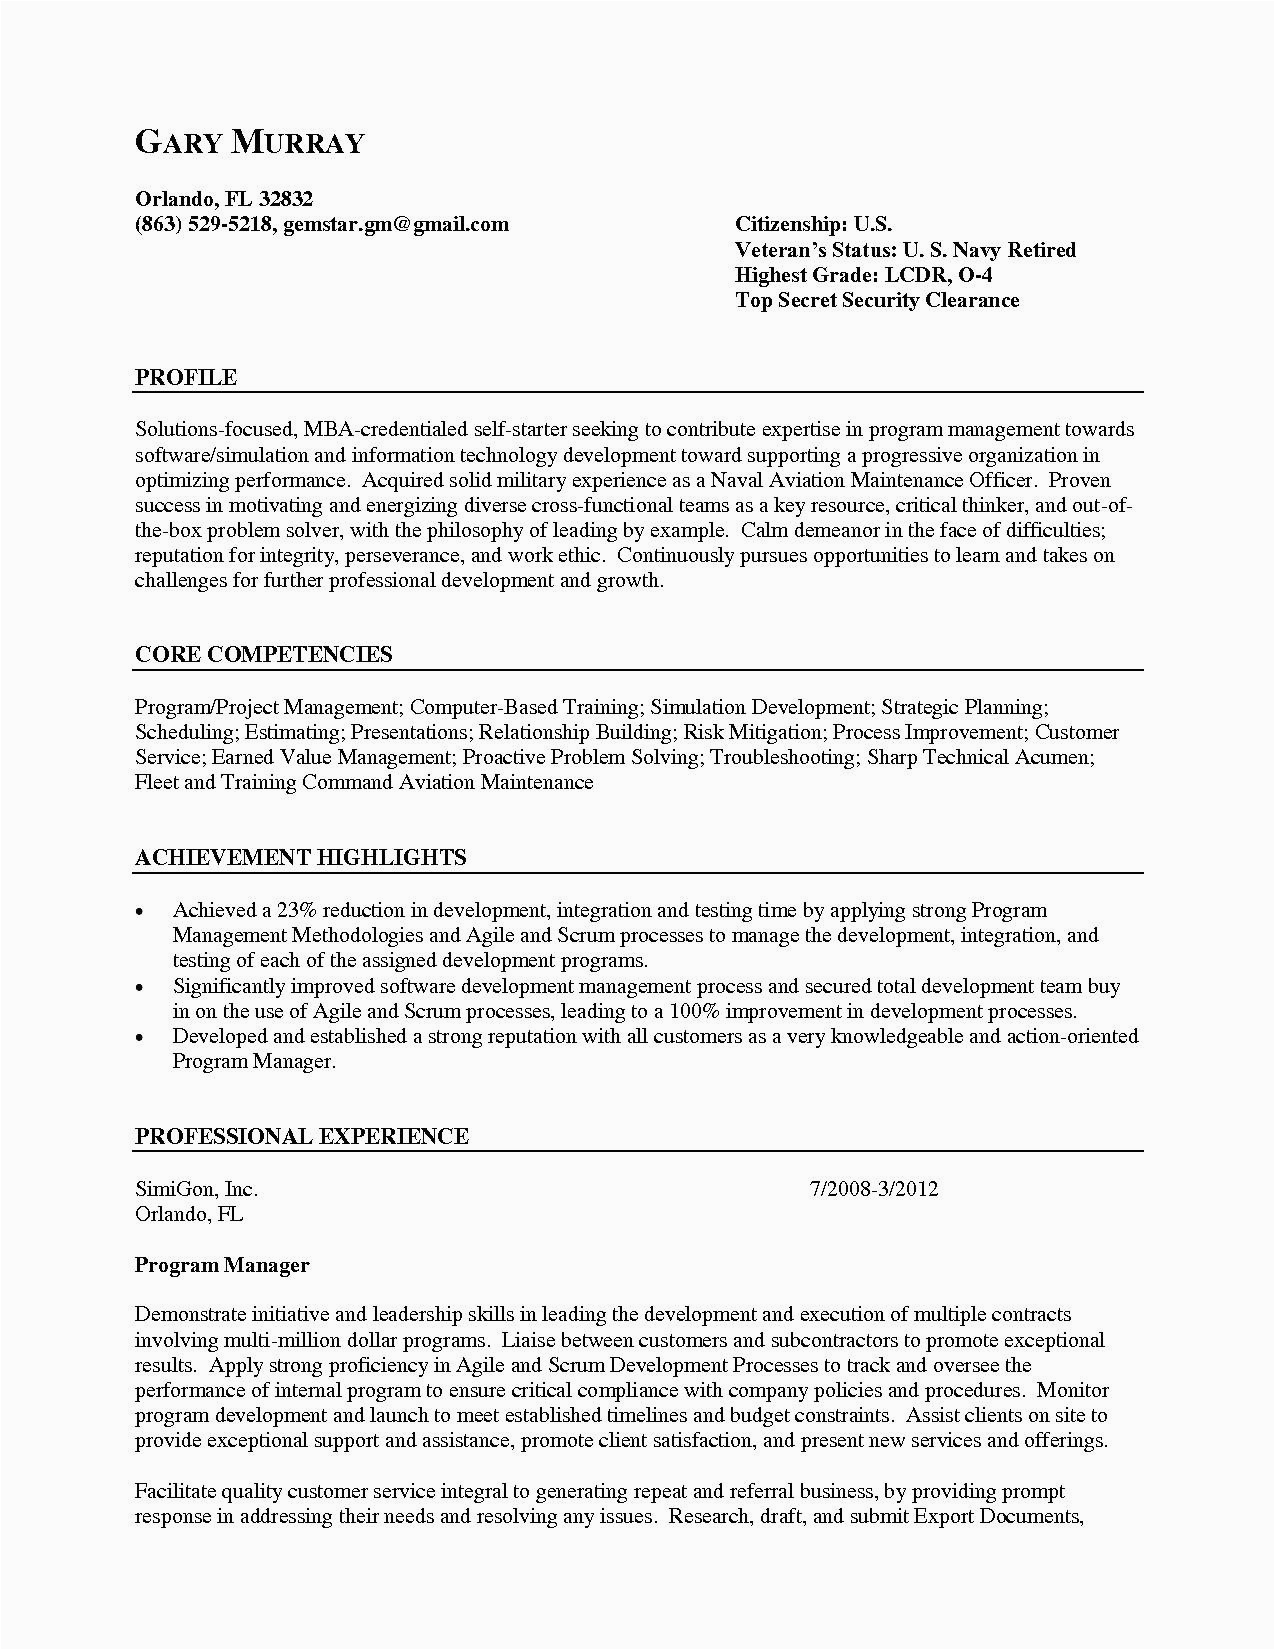 Sample Resume for Retired Person Returning to Work 90 Fresh Sample Resume for Retired Person Returning to